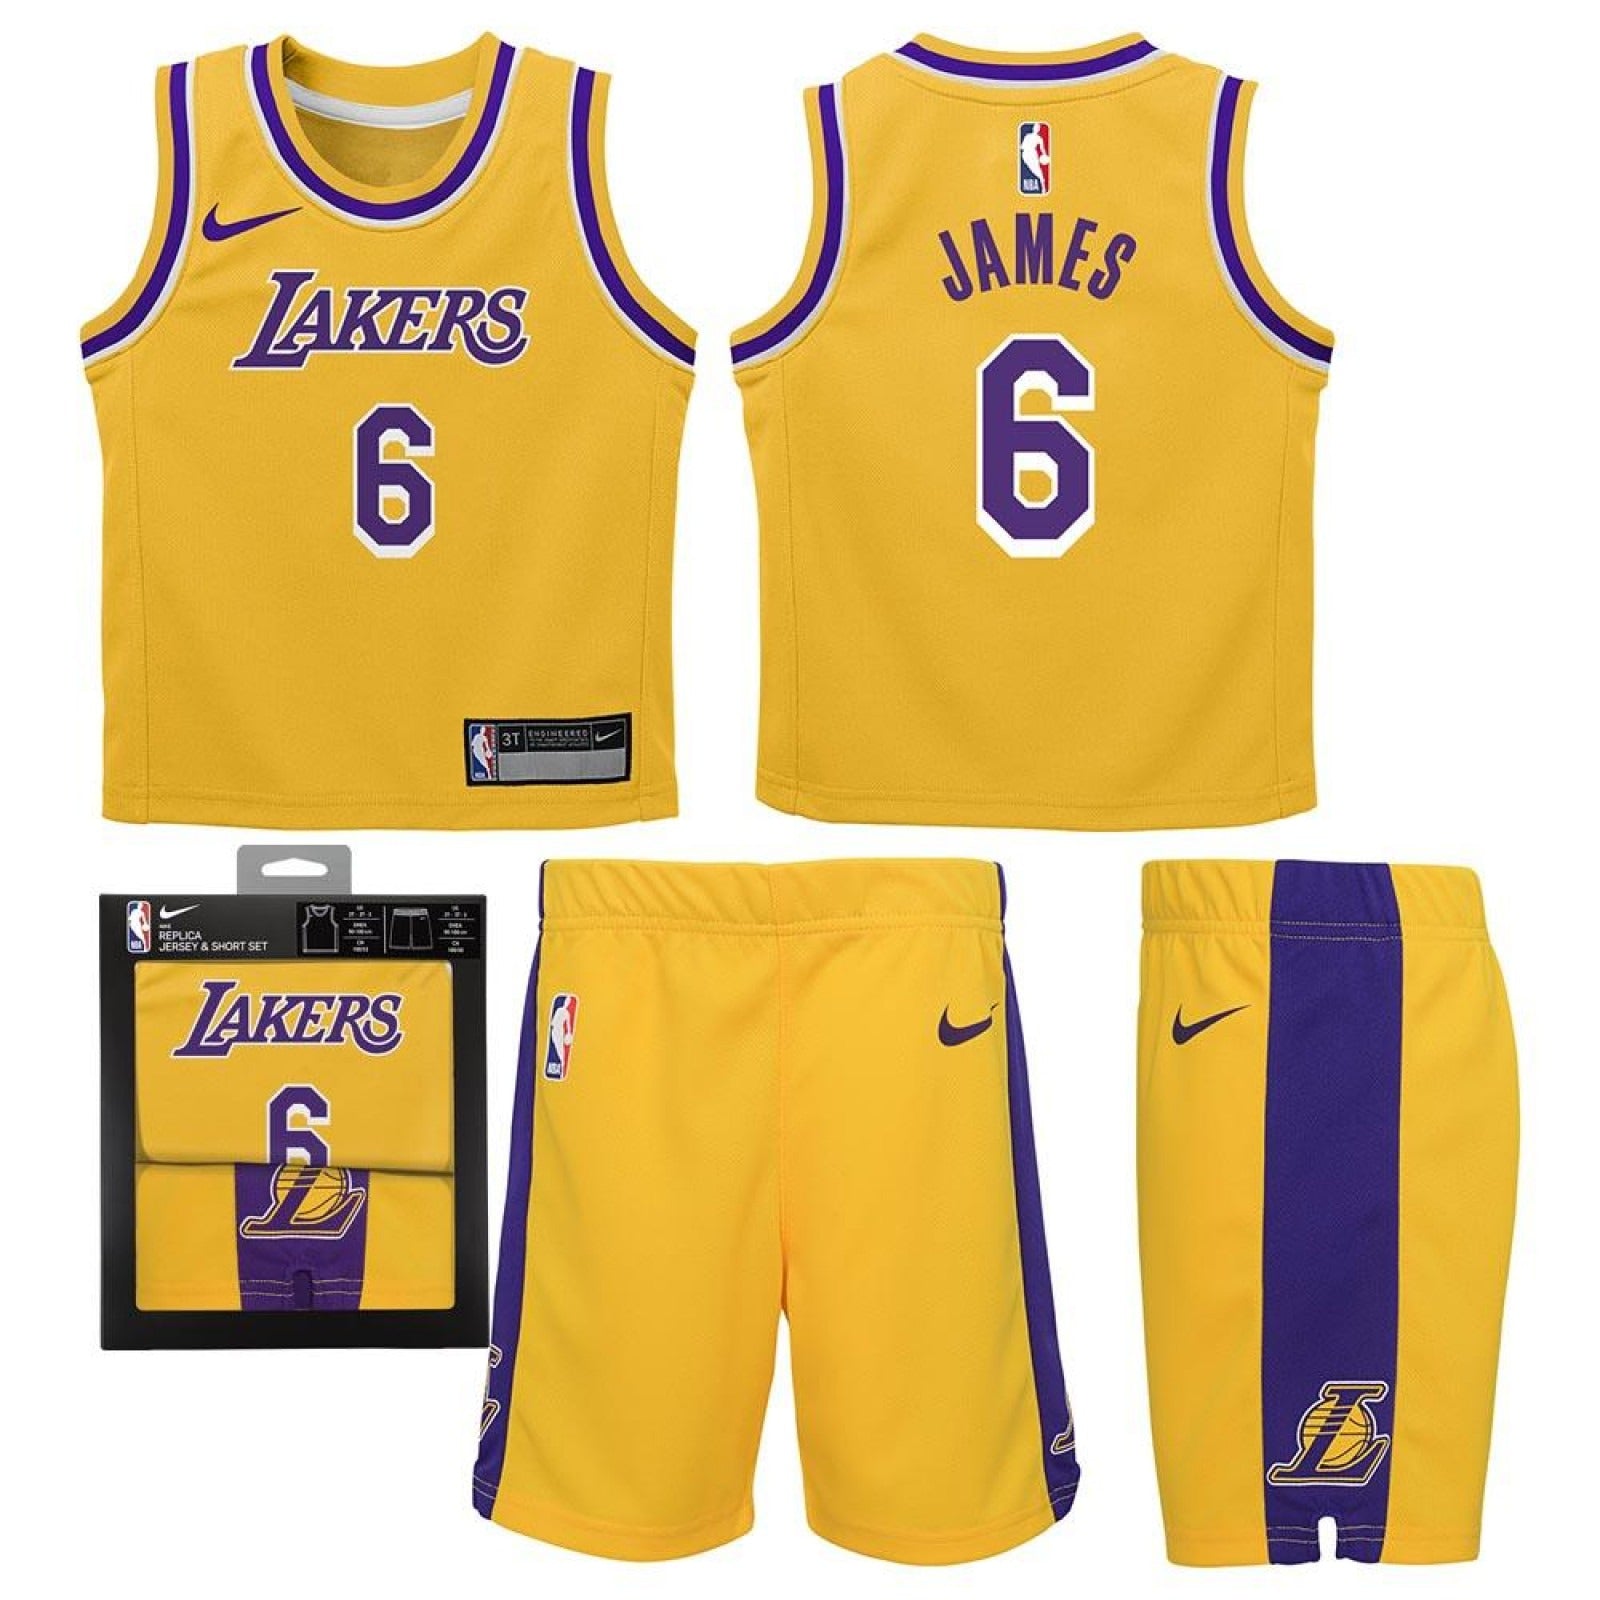 Fanatics Replica Jersey NBA Icon Edition Los Angeles Lakers Lebron James #6  yellow (Youth Collection)